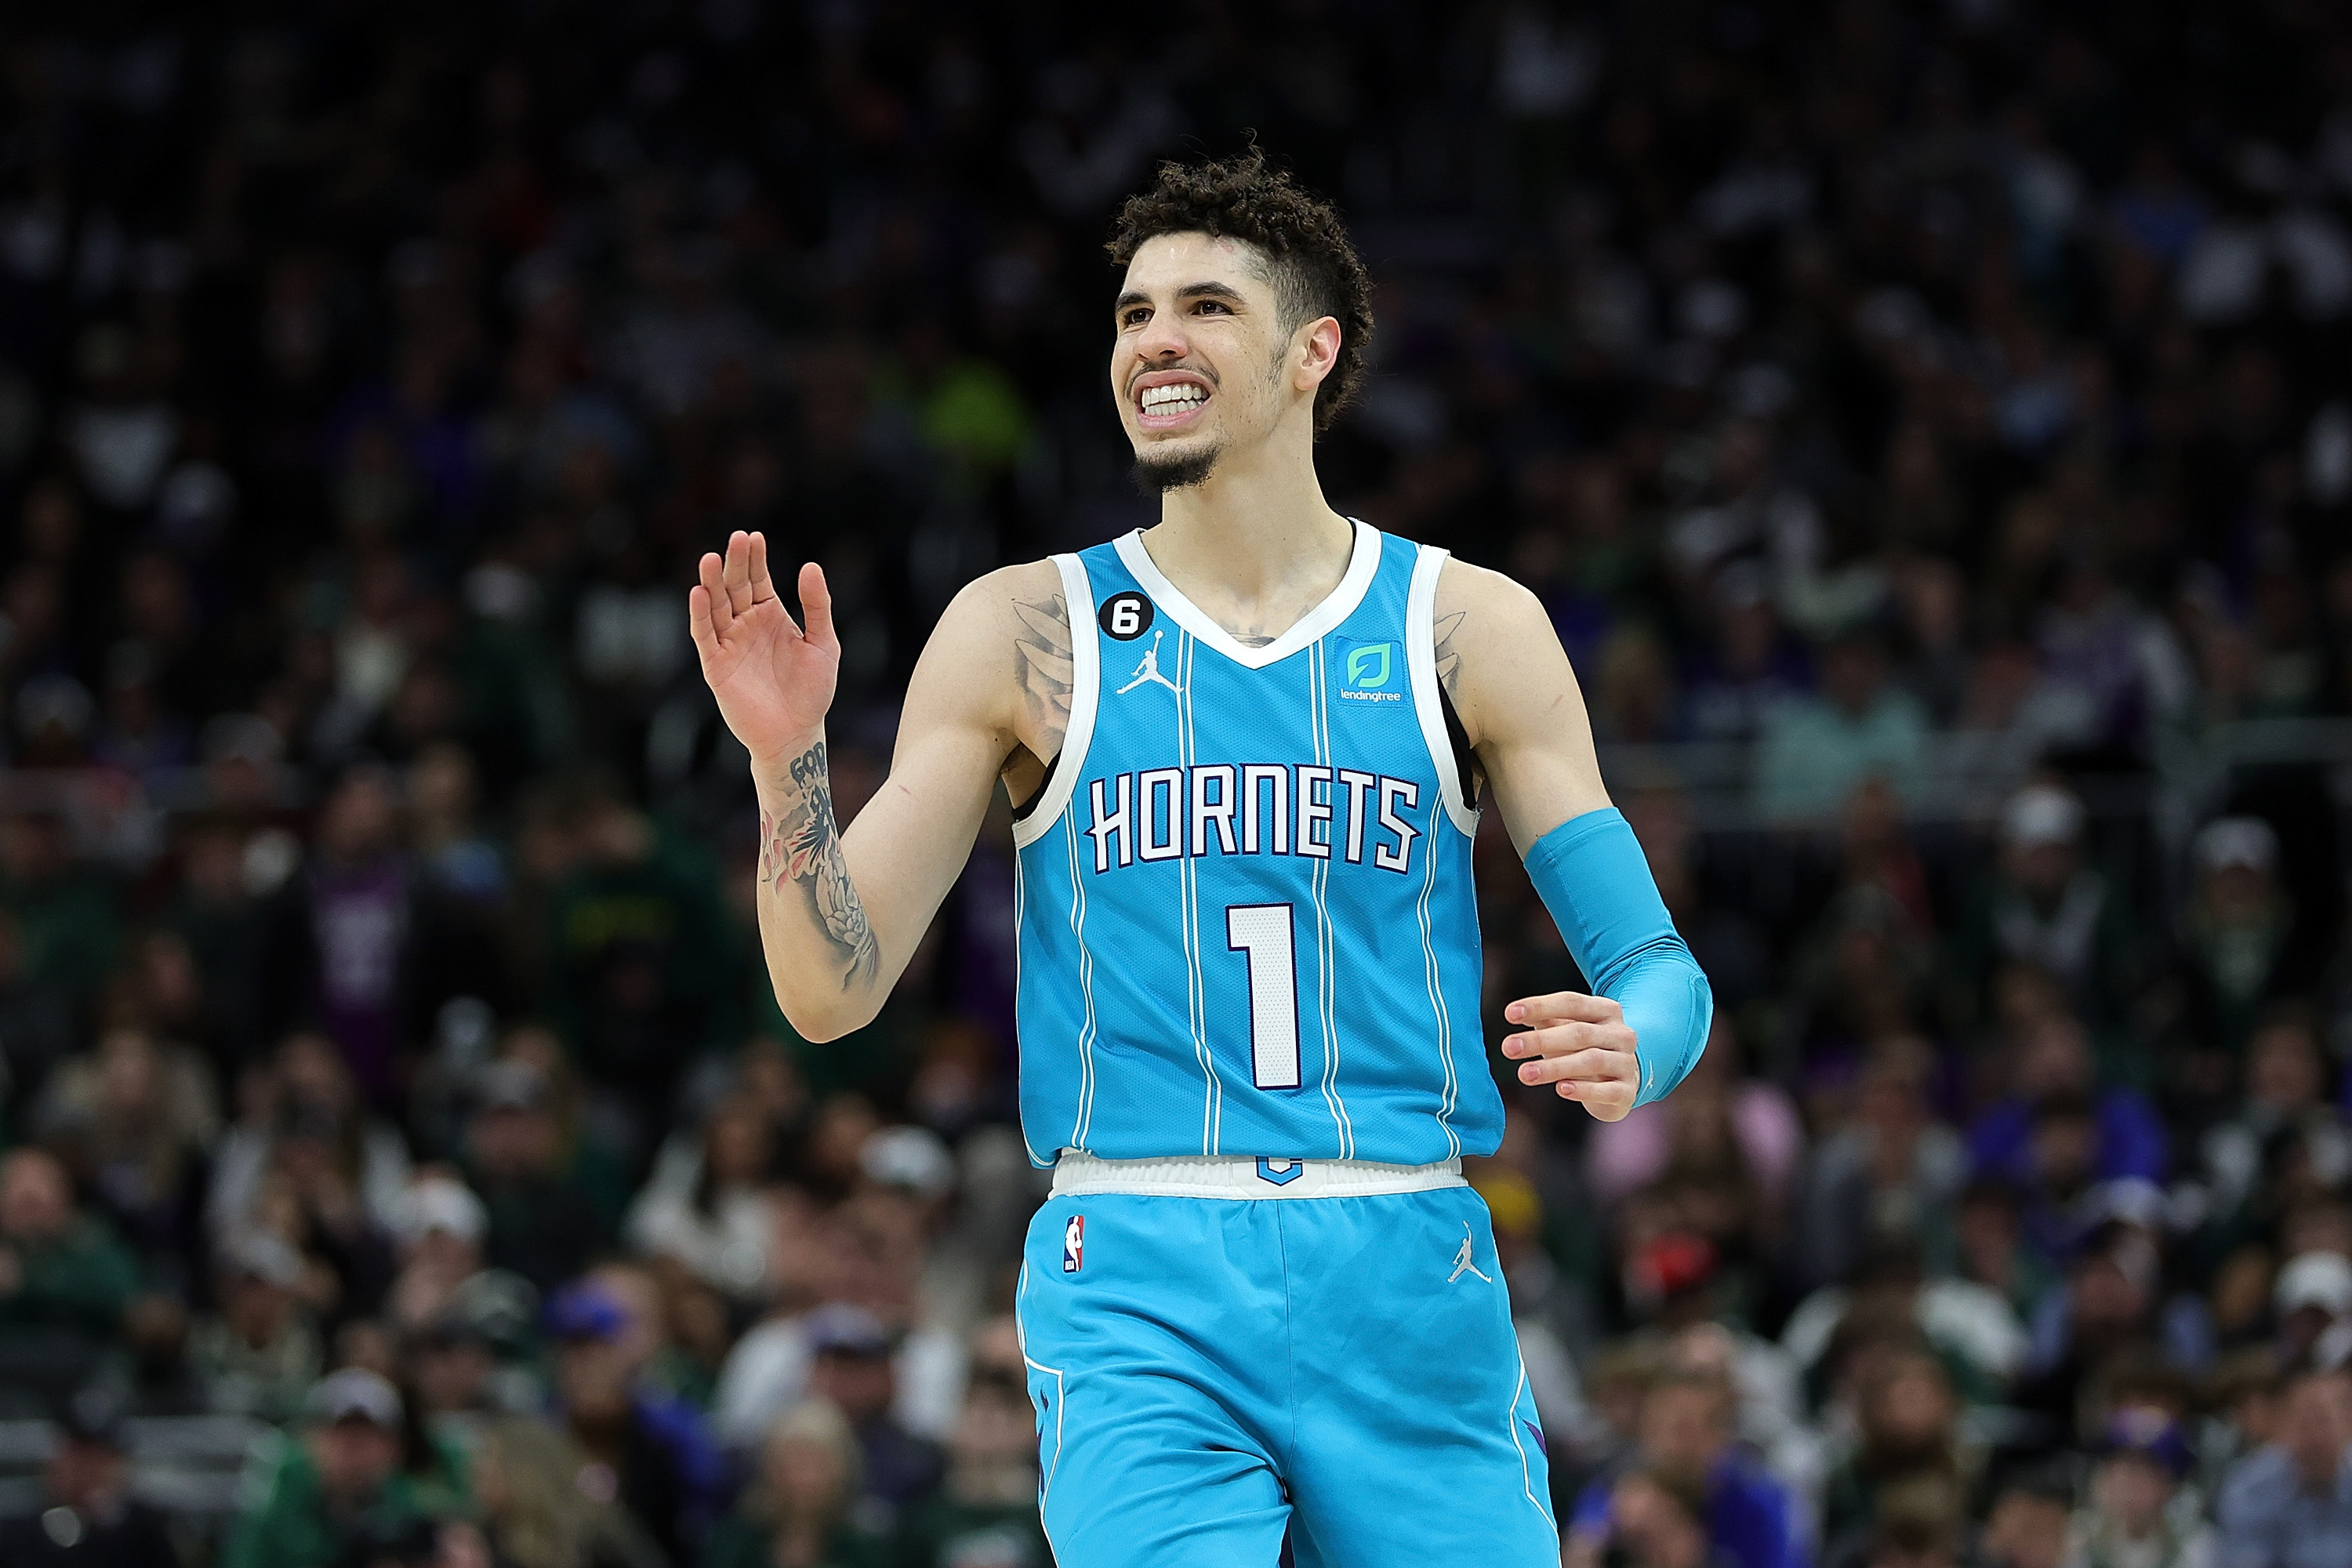 NBA Futures: Take the Under on Charlotte's Live Win Total